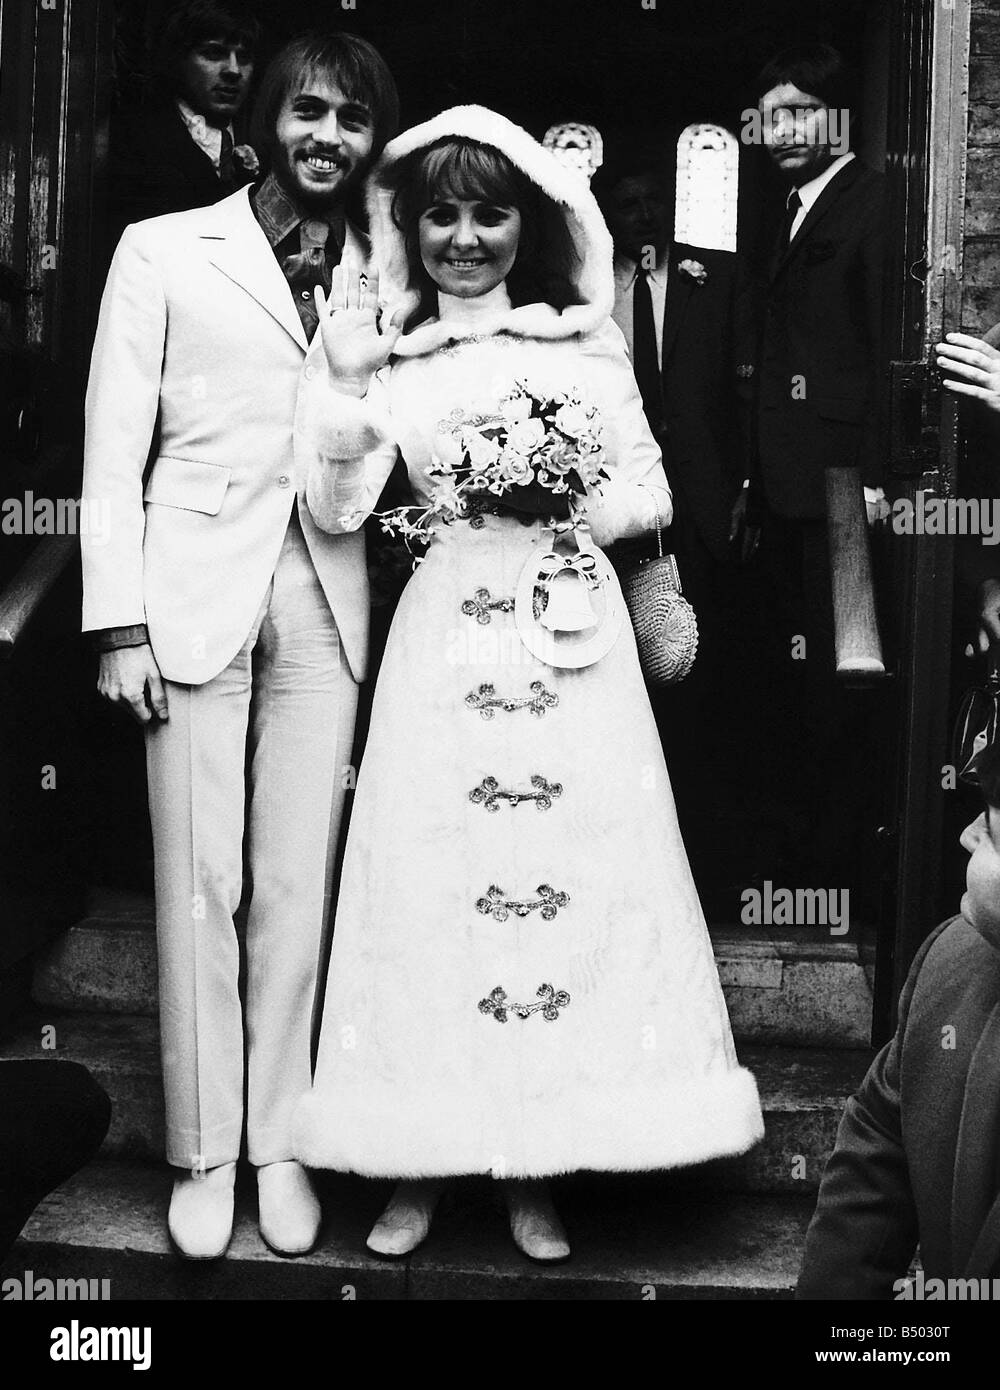 Lulu singer weds Maurice Gibb of the Bee Gees Stock Photo